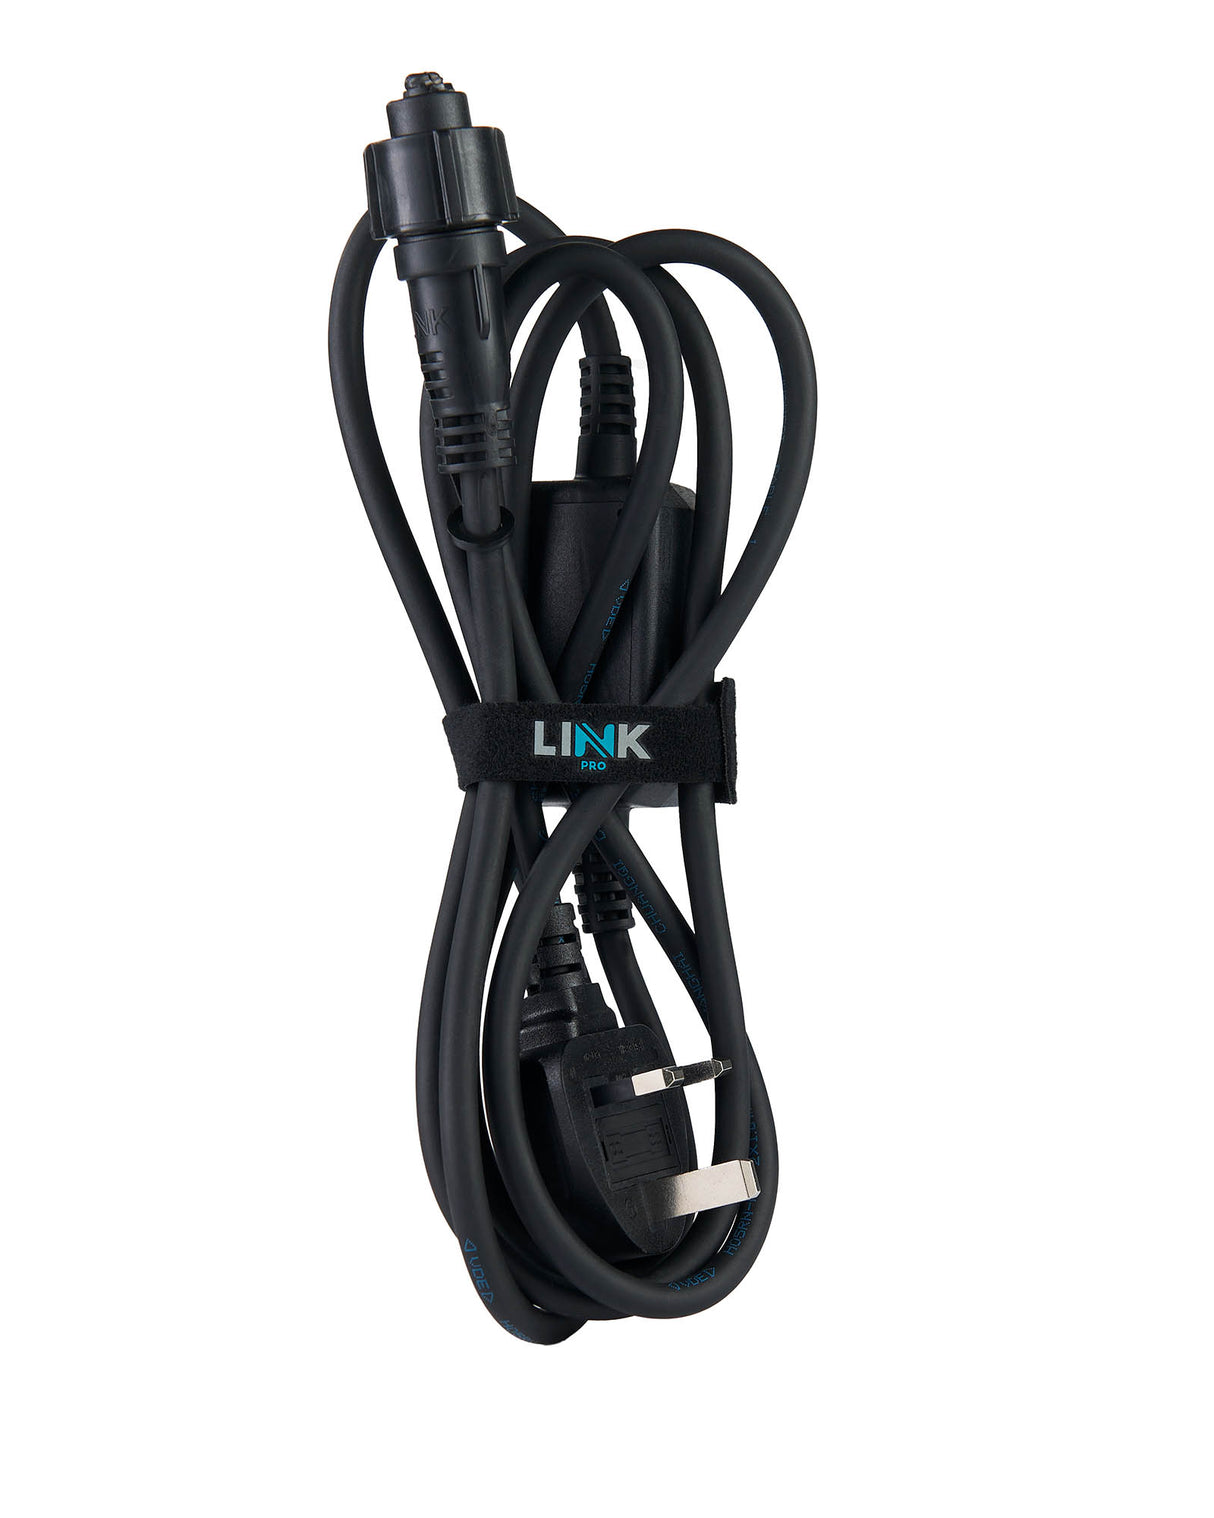 LINK PRO 2m Black Starter Cable - Powers up to 20,000 LEDs